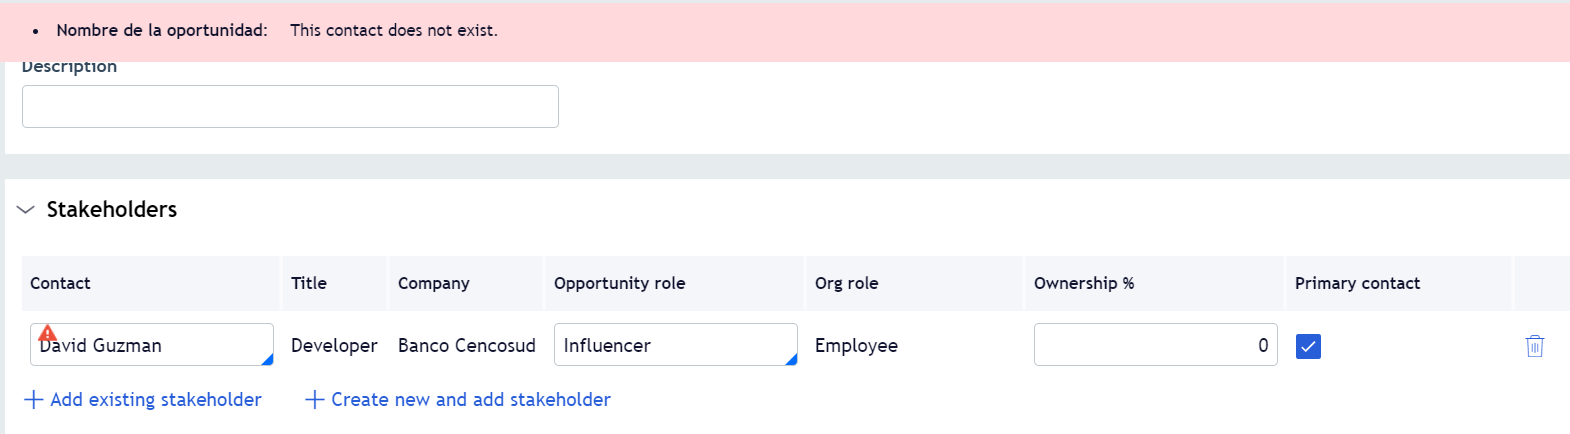 When I try to add a new stakeholder to the opportunity, New opportunity form shows me at the top the error message "This contact does not exist", blocking the create button. 